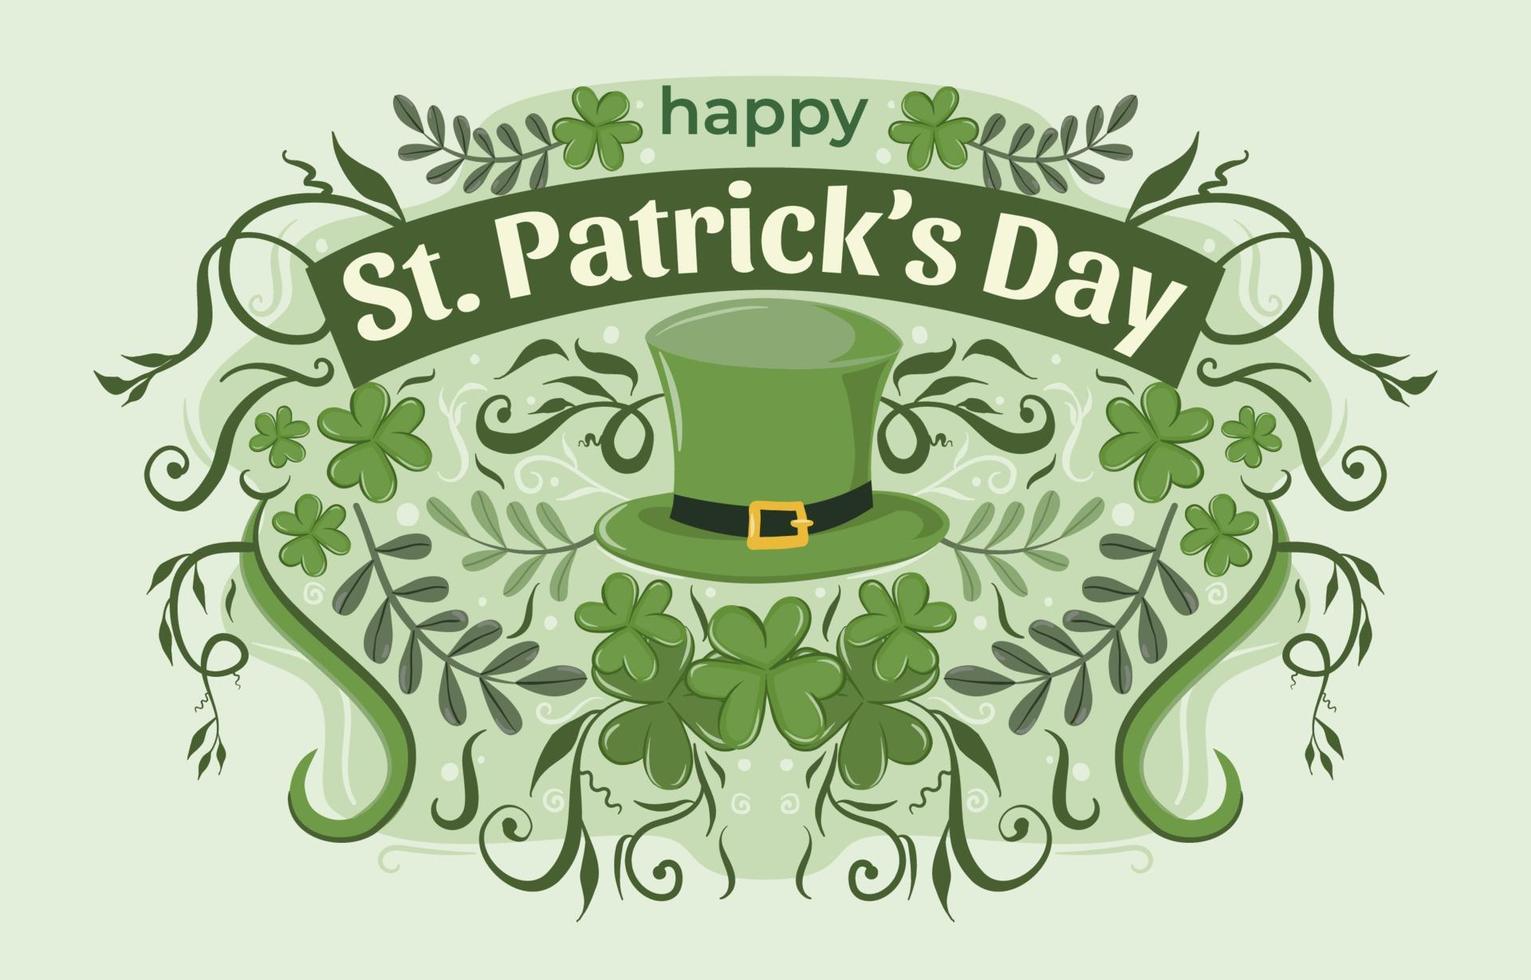 NS. patrick's day hoed achtergrond vector